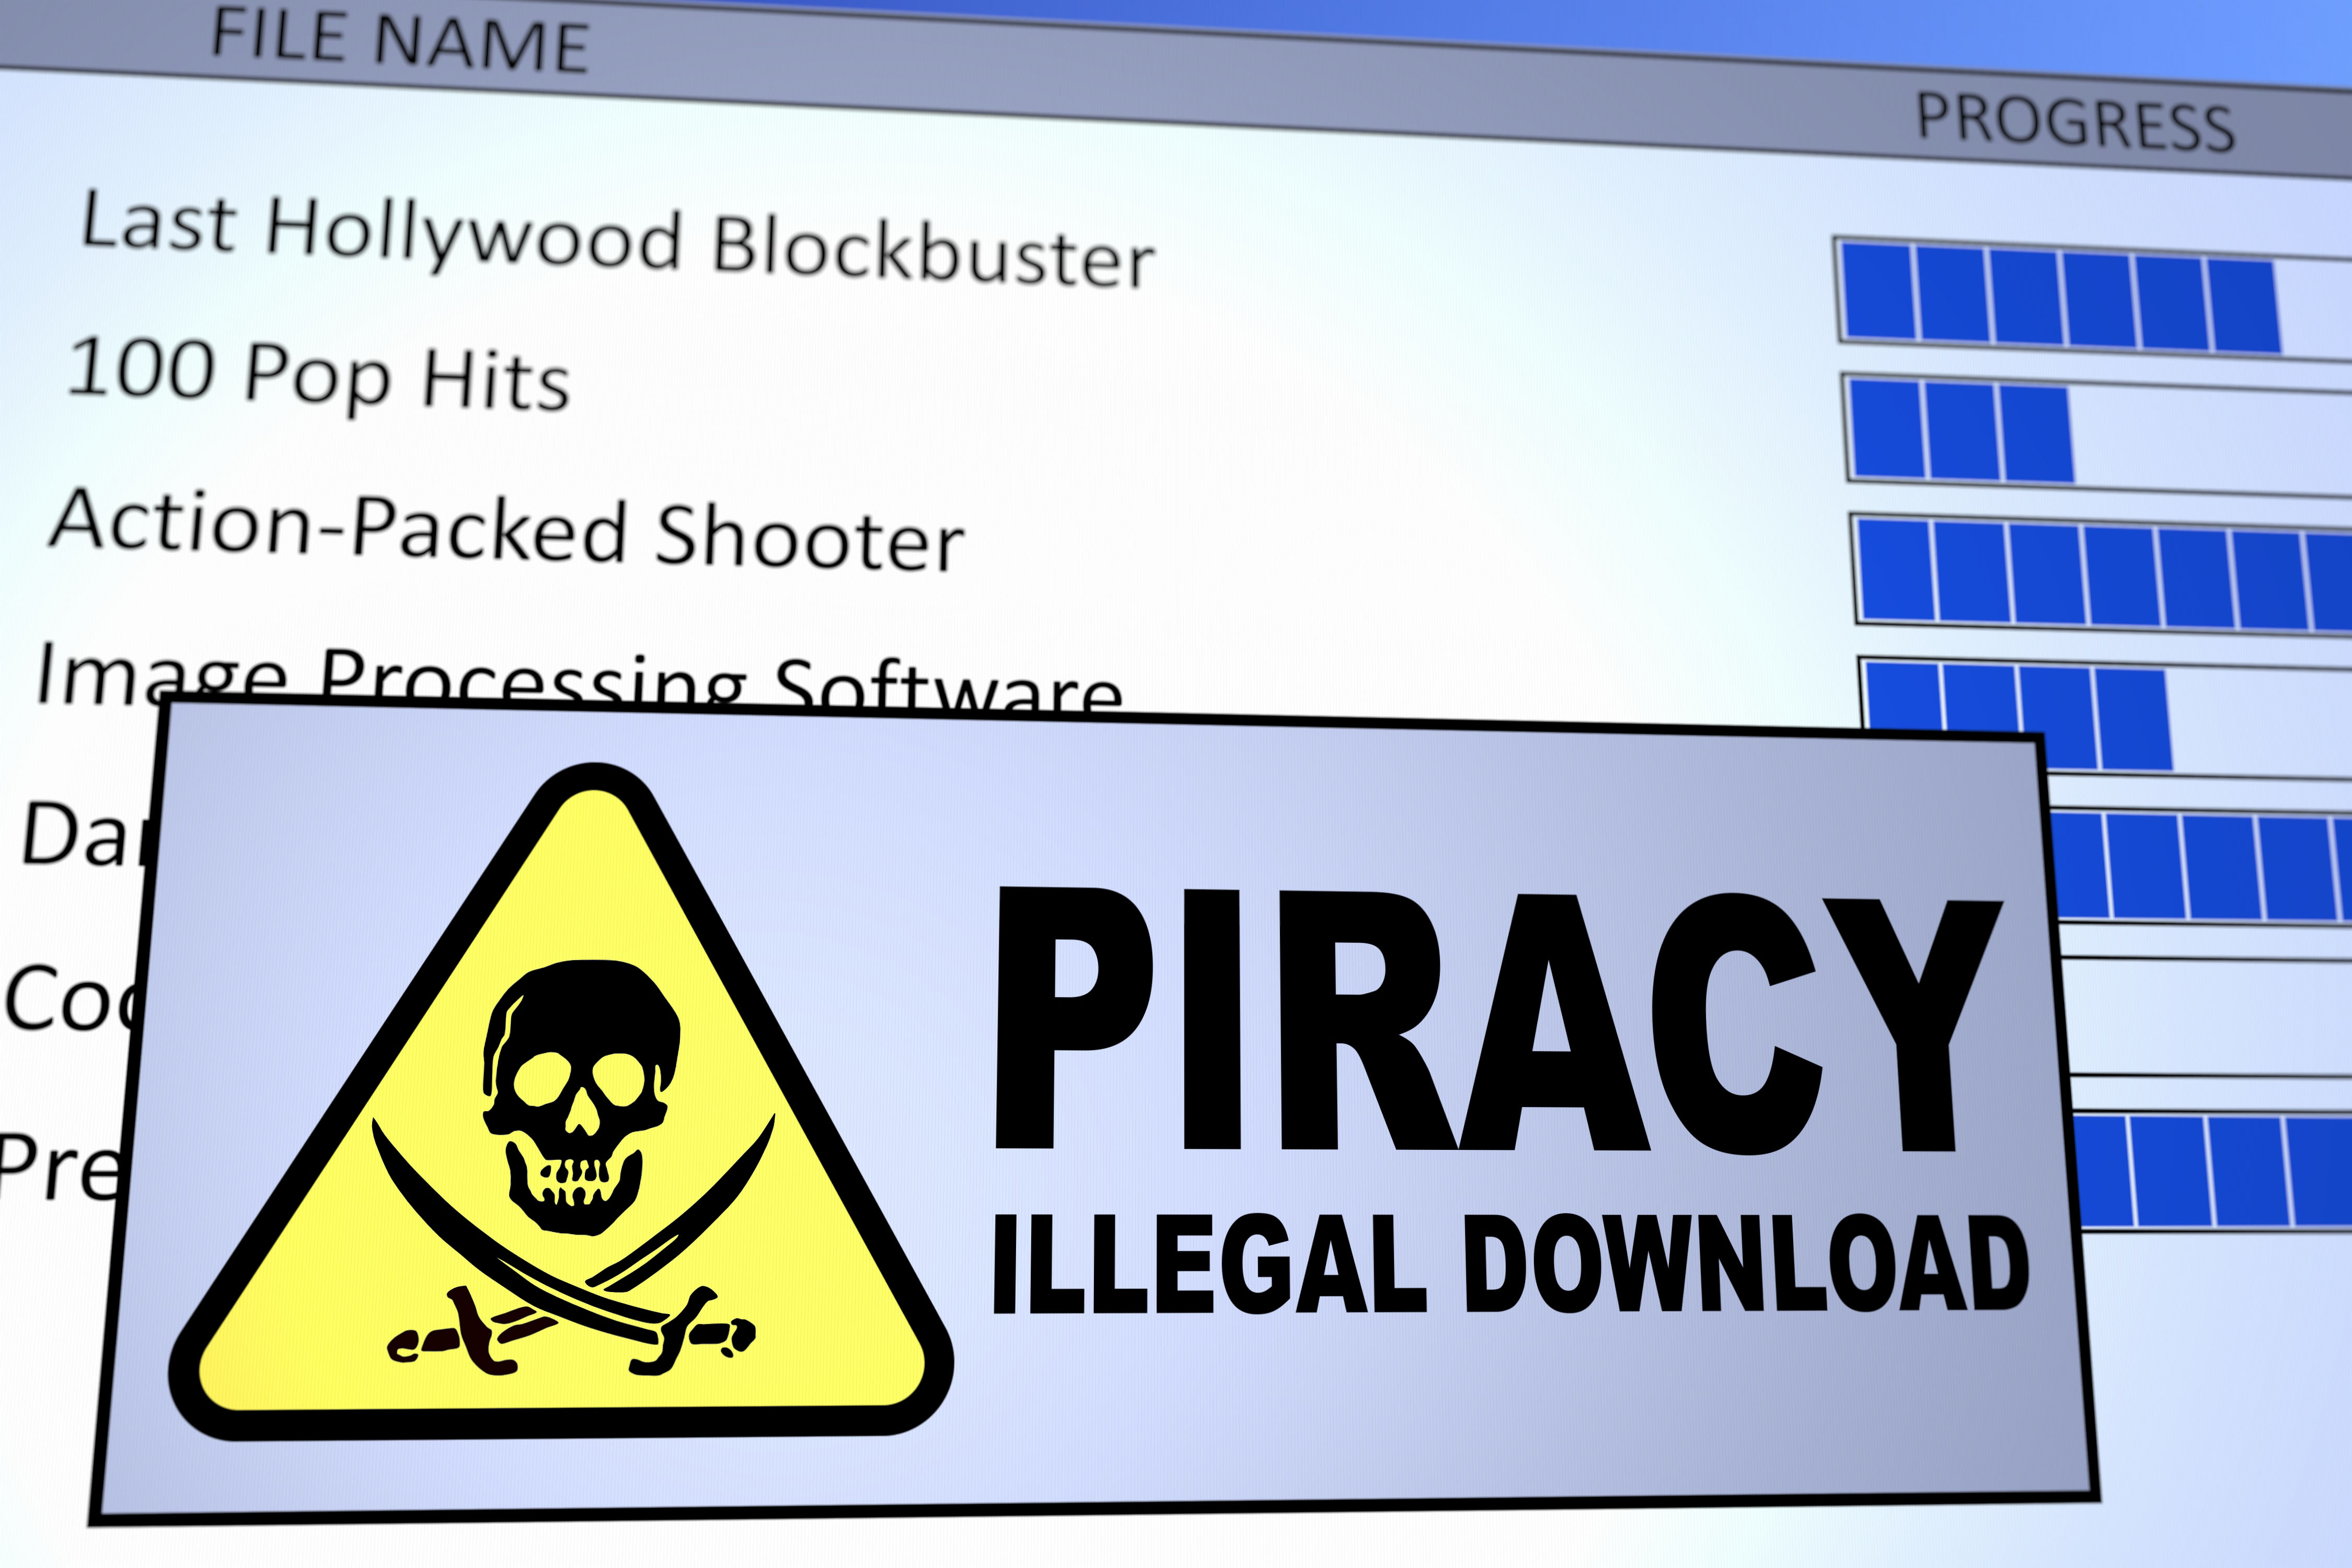 Computer generated image of an illegal piracy download. Concept for internet piracy.